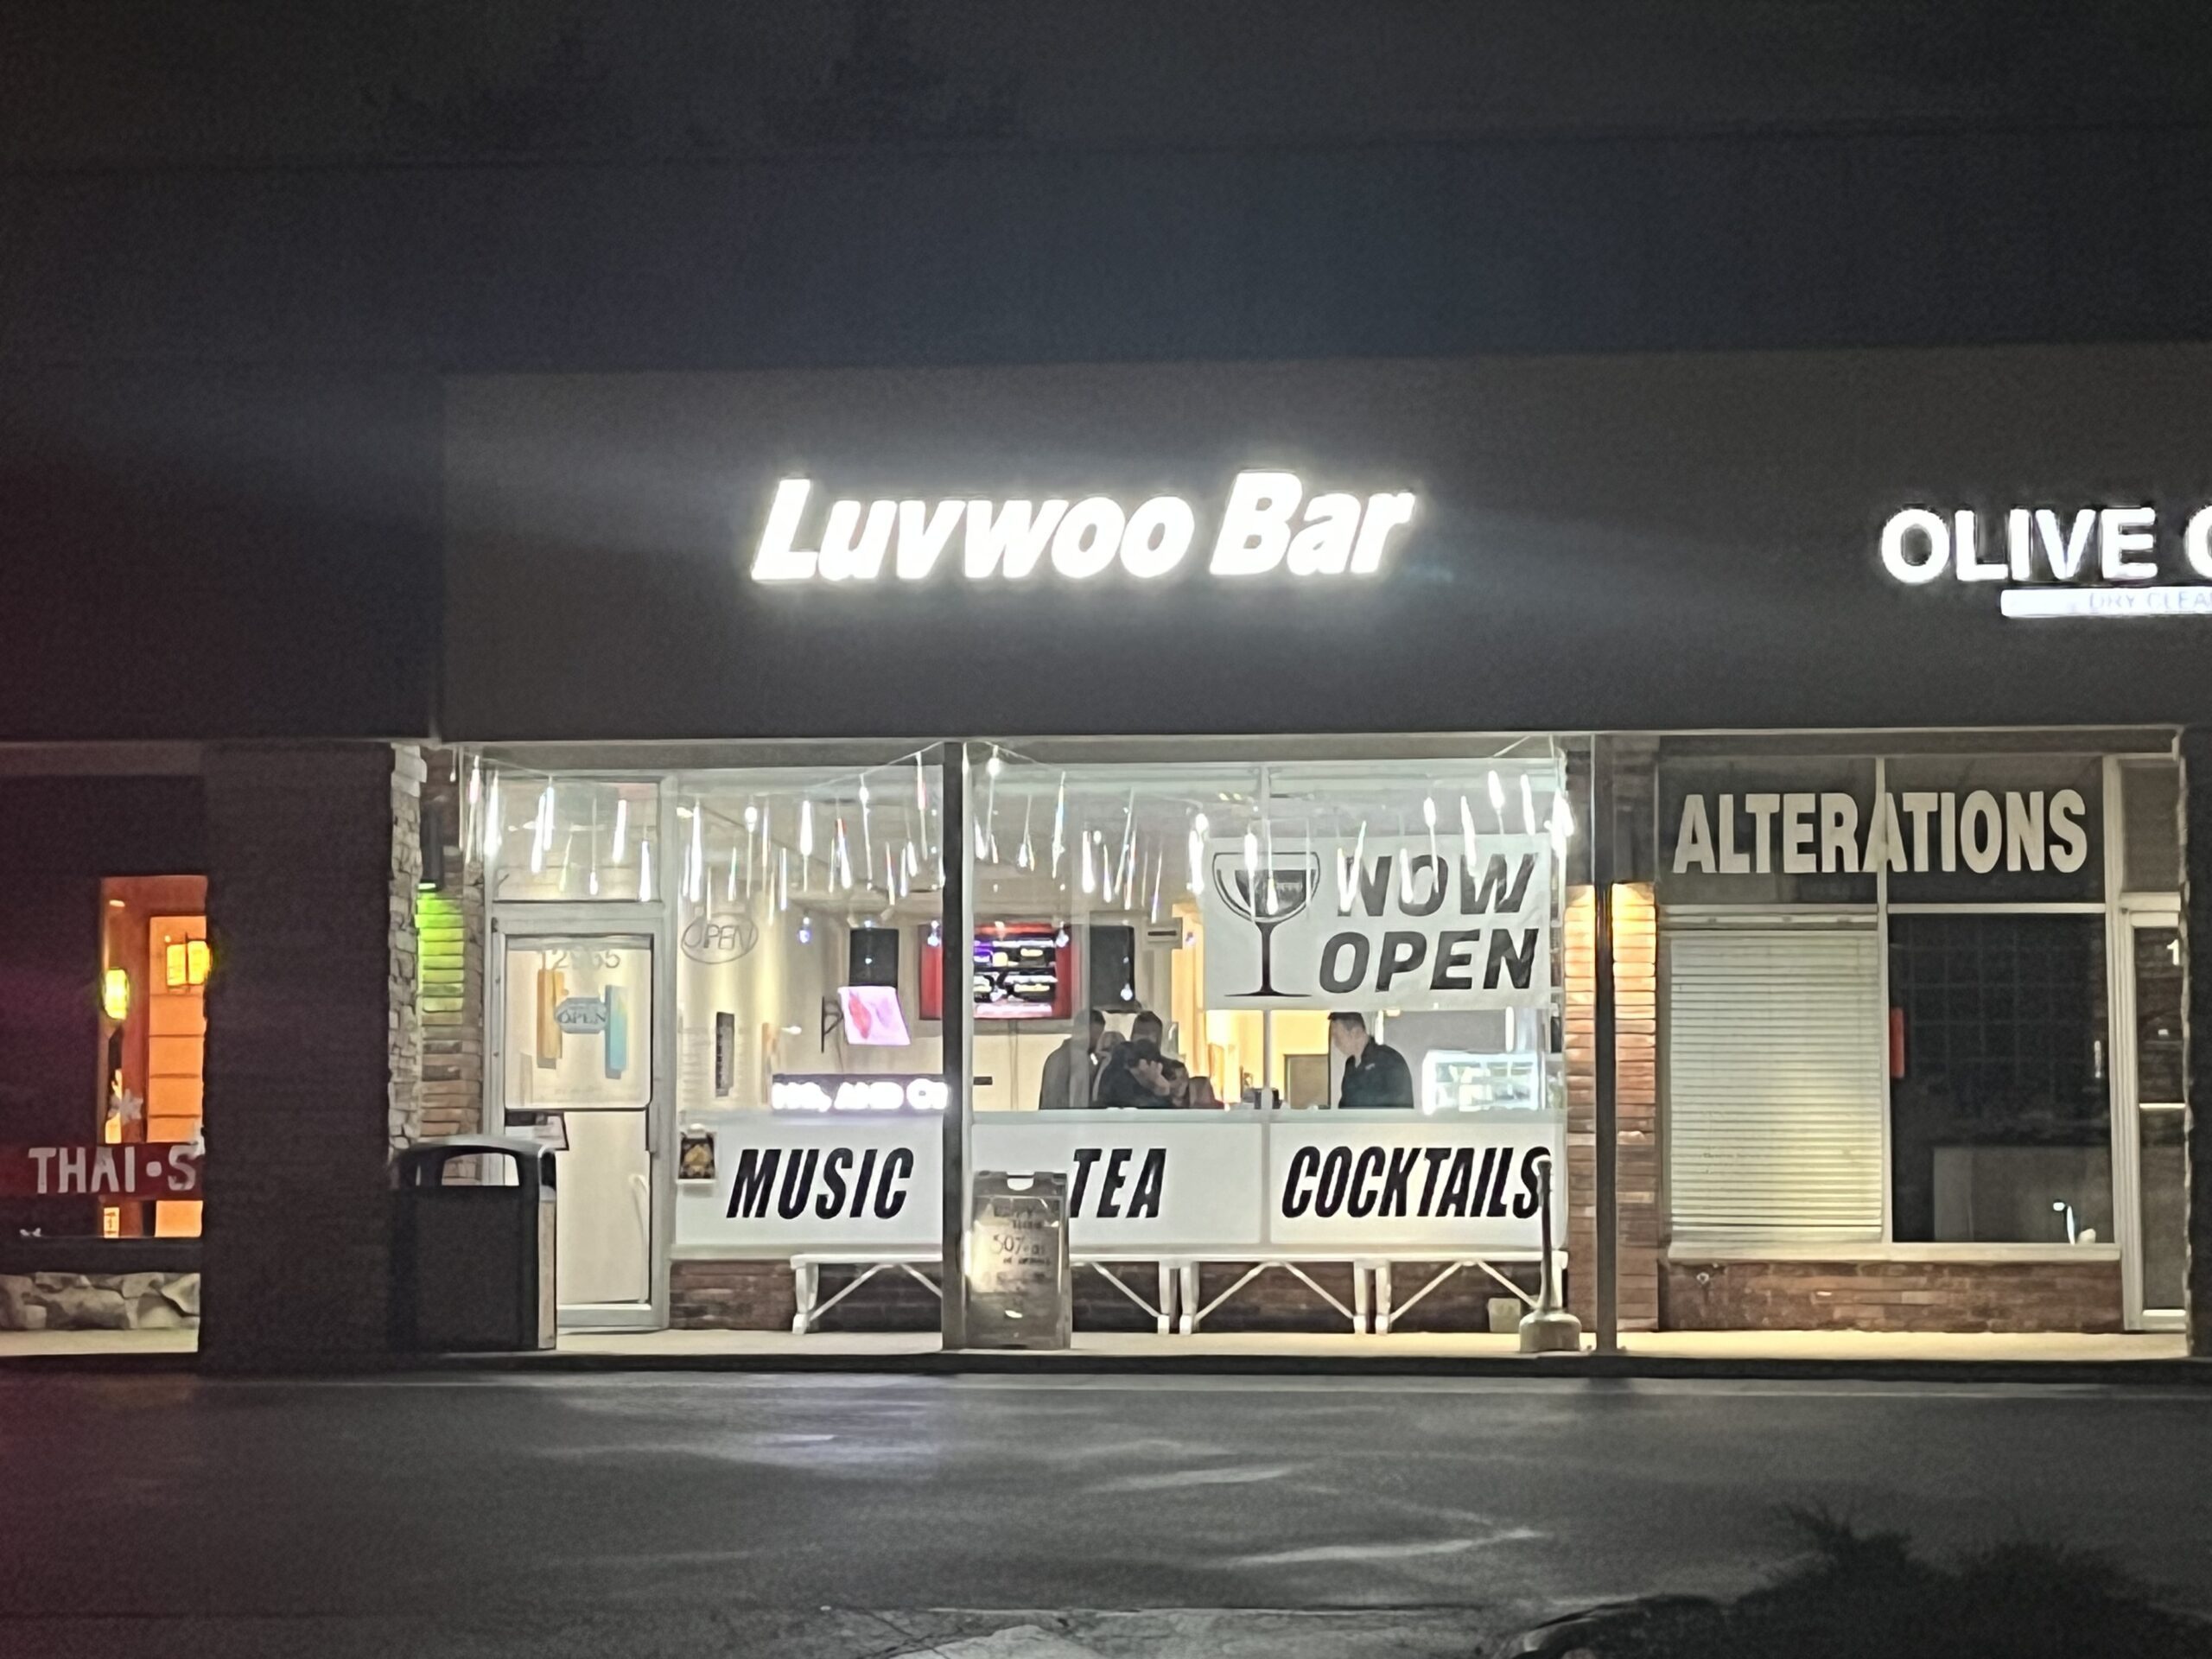 Luvwoo Bar Opens on Olive Blvd in Creve Coeur, MO